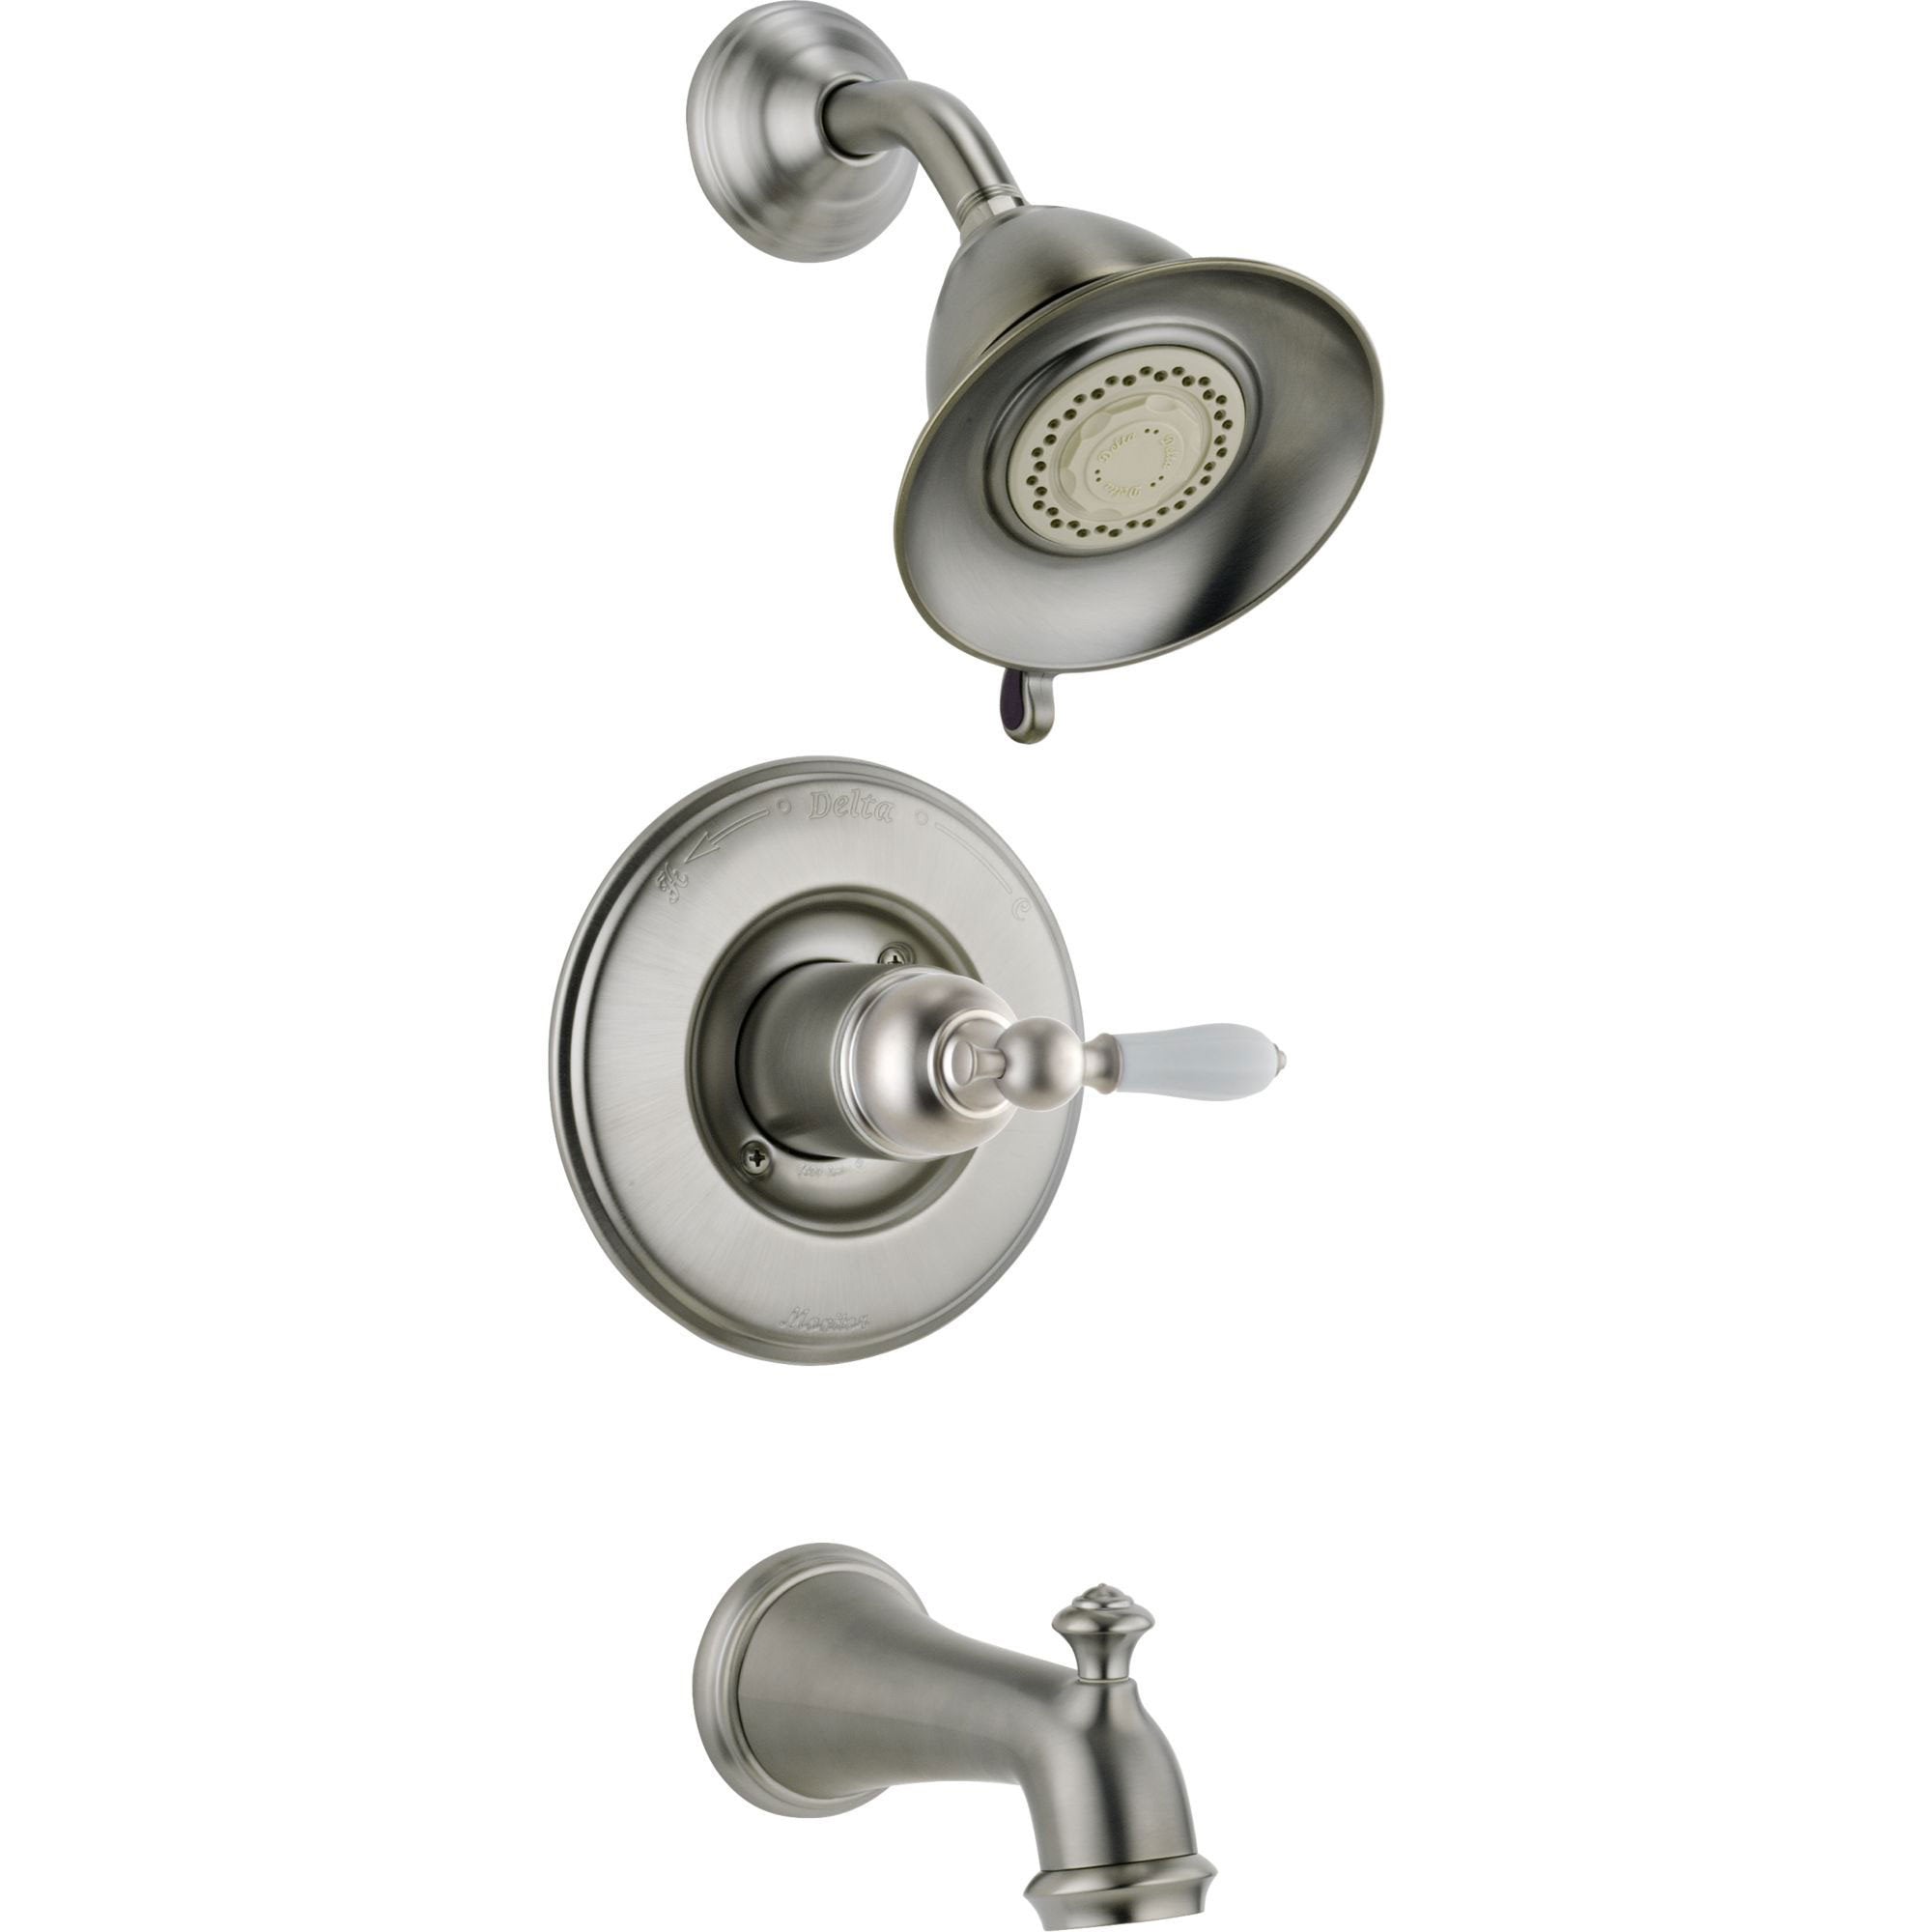 Delta Traditional Victorian Stainless Steel Finish 14 Series Tub and Shower Faucet Combo INCLUDES Rough-in Valve with Stops and White Lever Handle D1177V